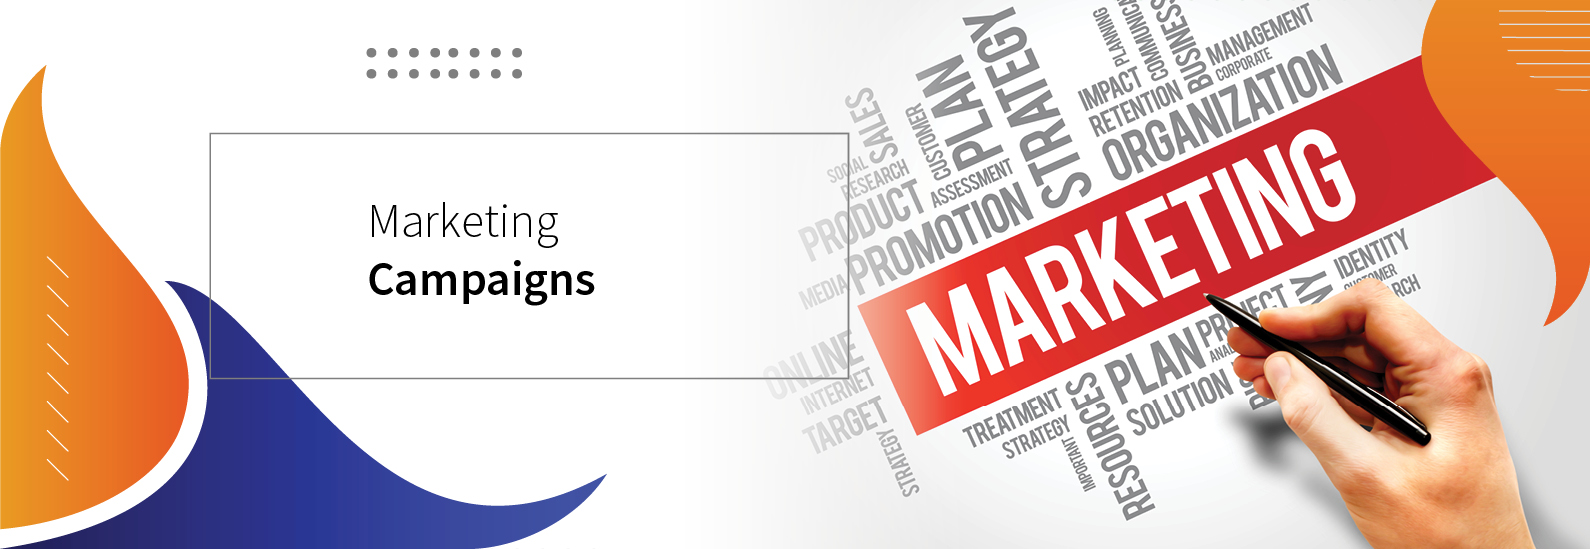 Marketing Campaigns banner